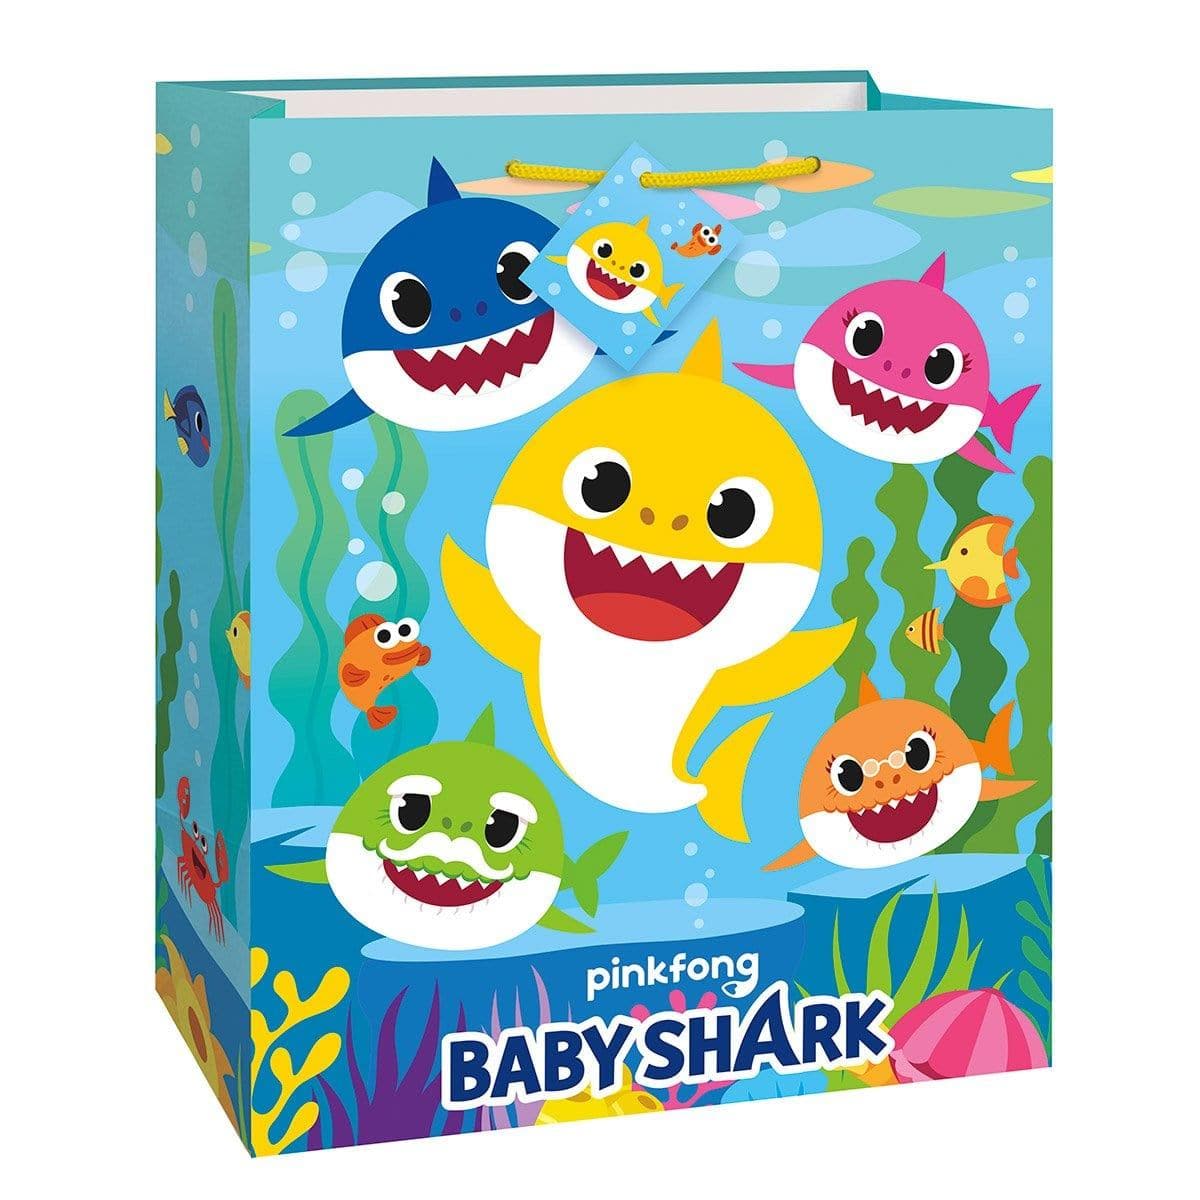 Buy Kids Birthday Baby Shark gift bag sold at Party Expert